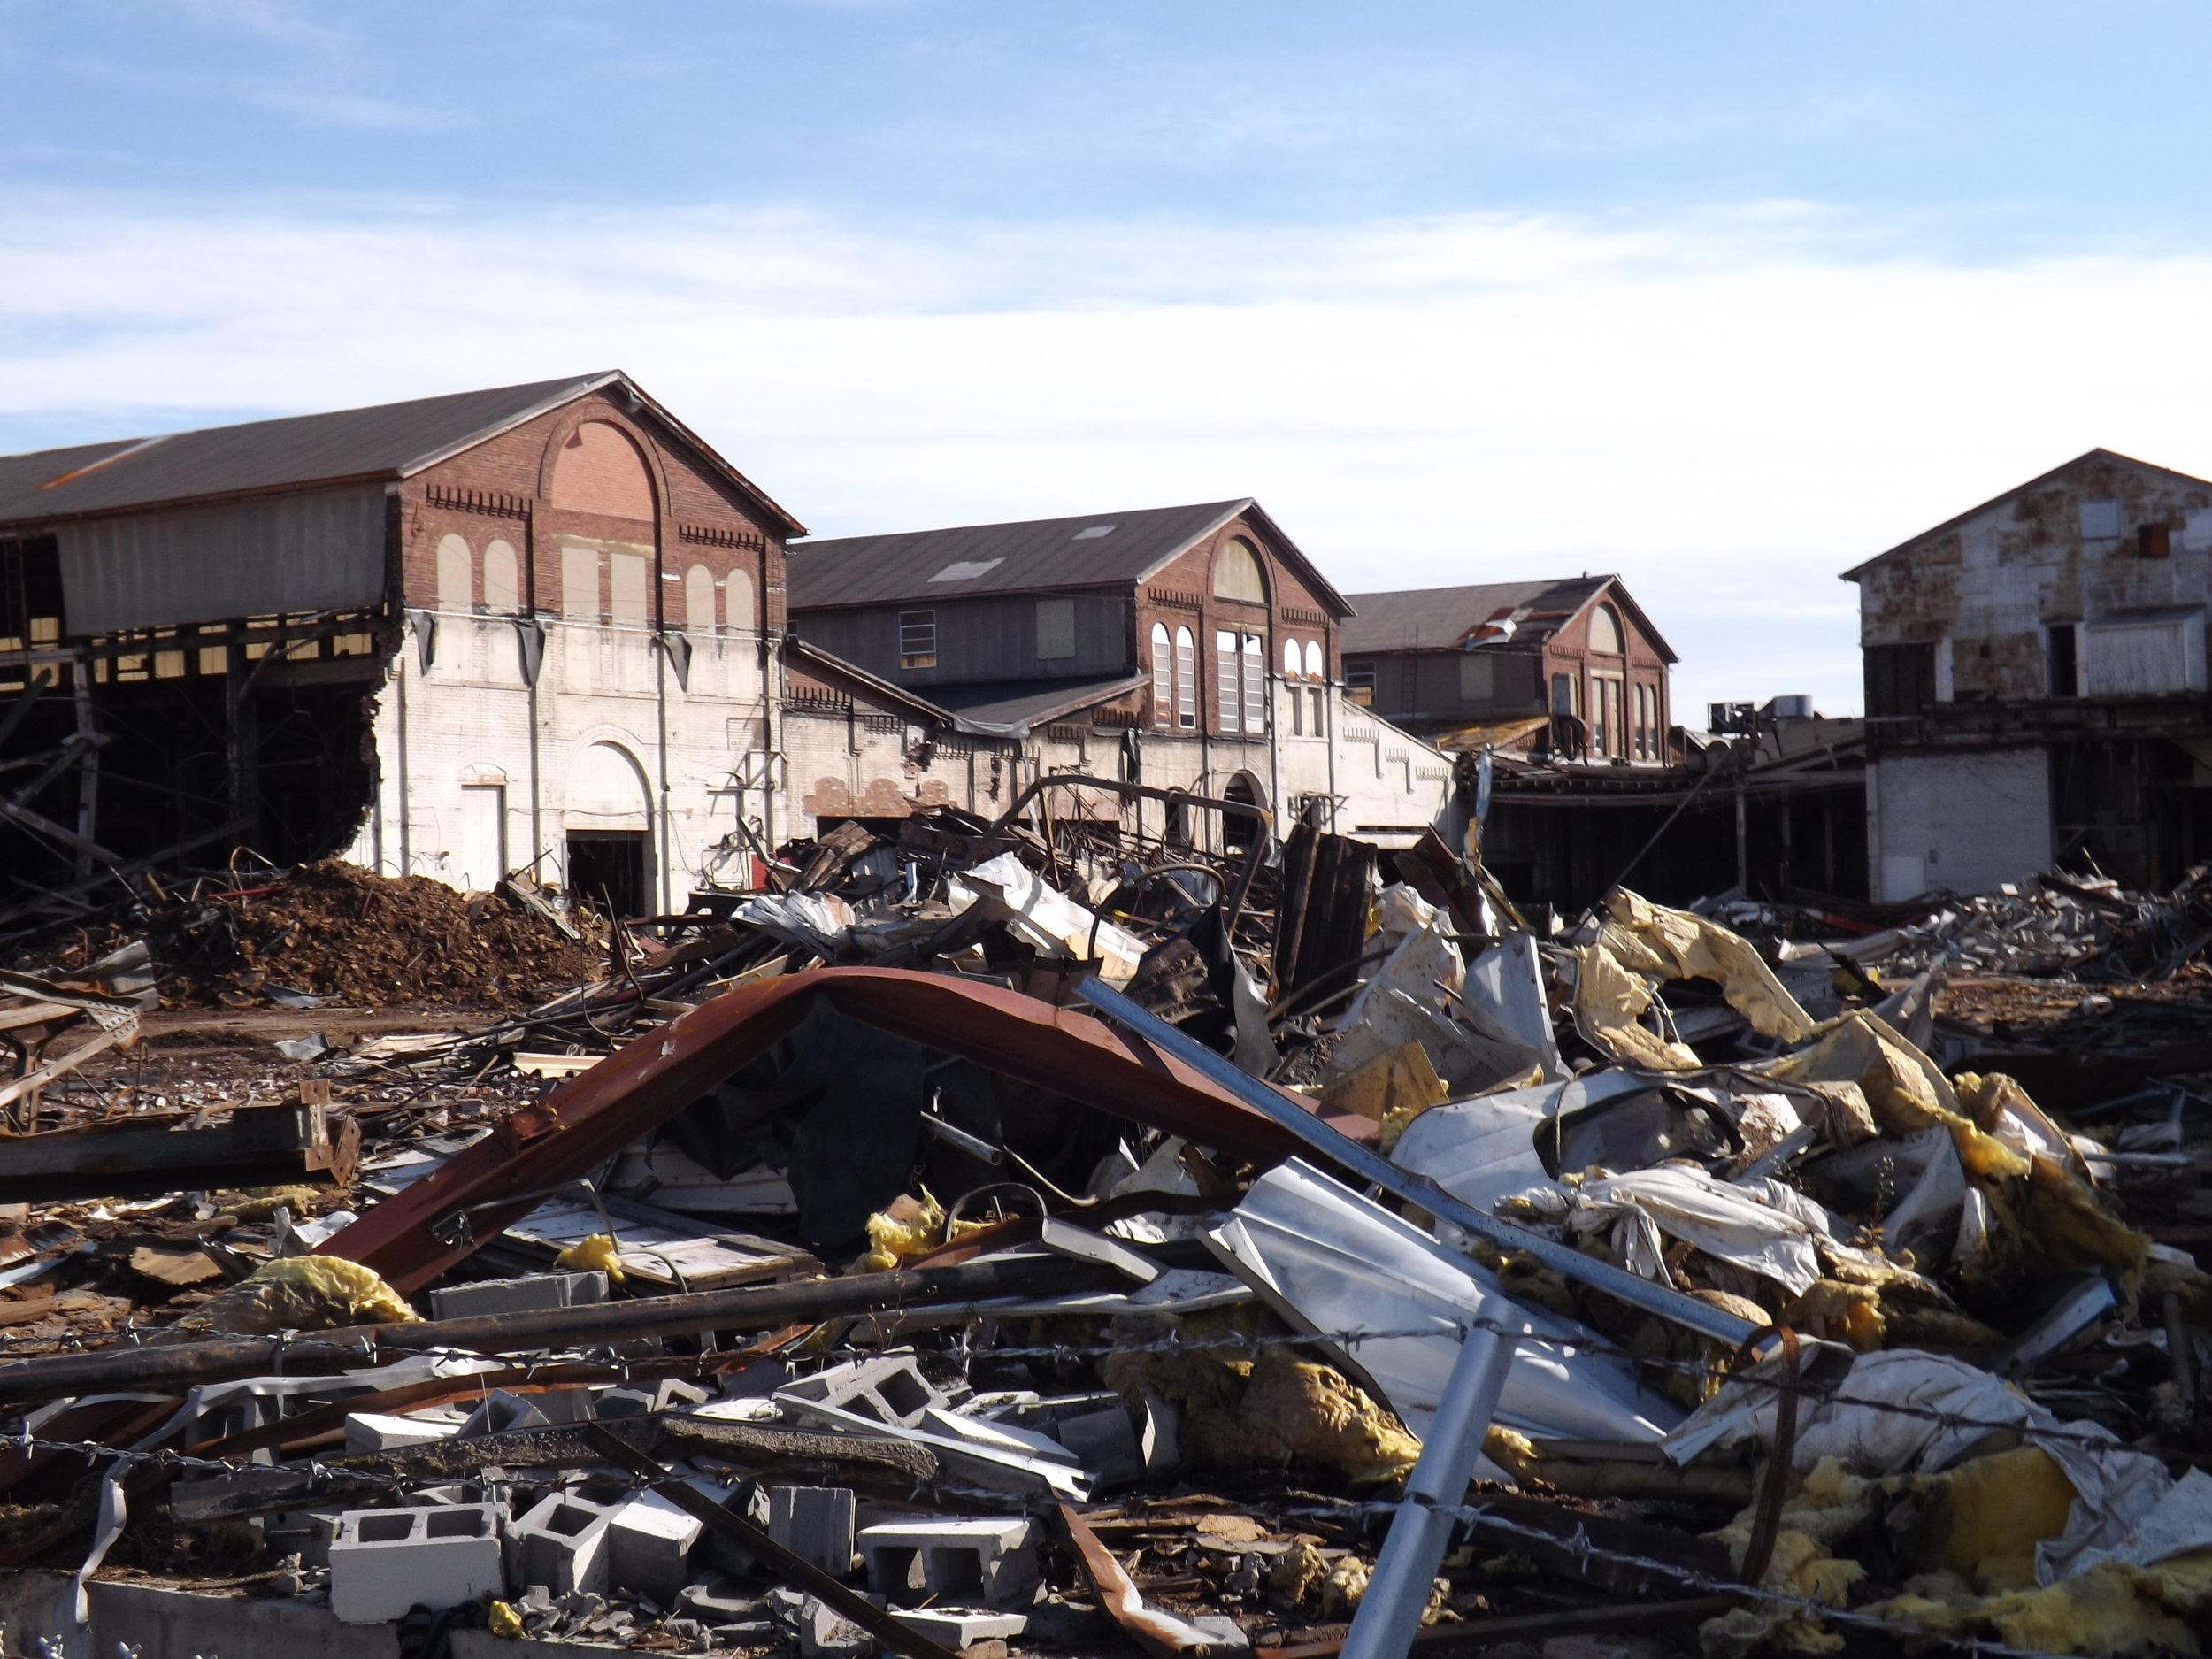   The Future of Brownfield Revitalization in Ohio    Pending Legislation Would Support the Long-Term, Sustainable Funding of Brownfield Revitalization Efforts Across Ohio 